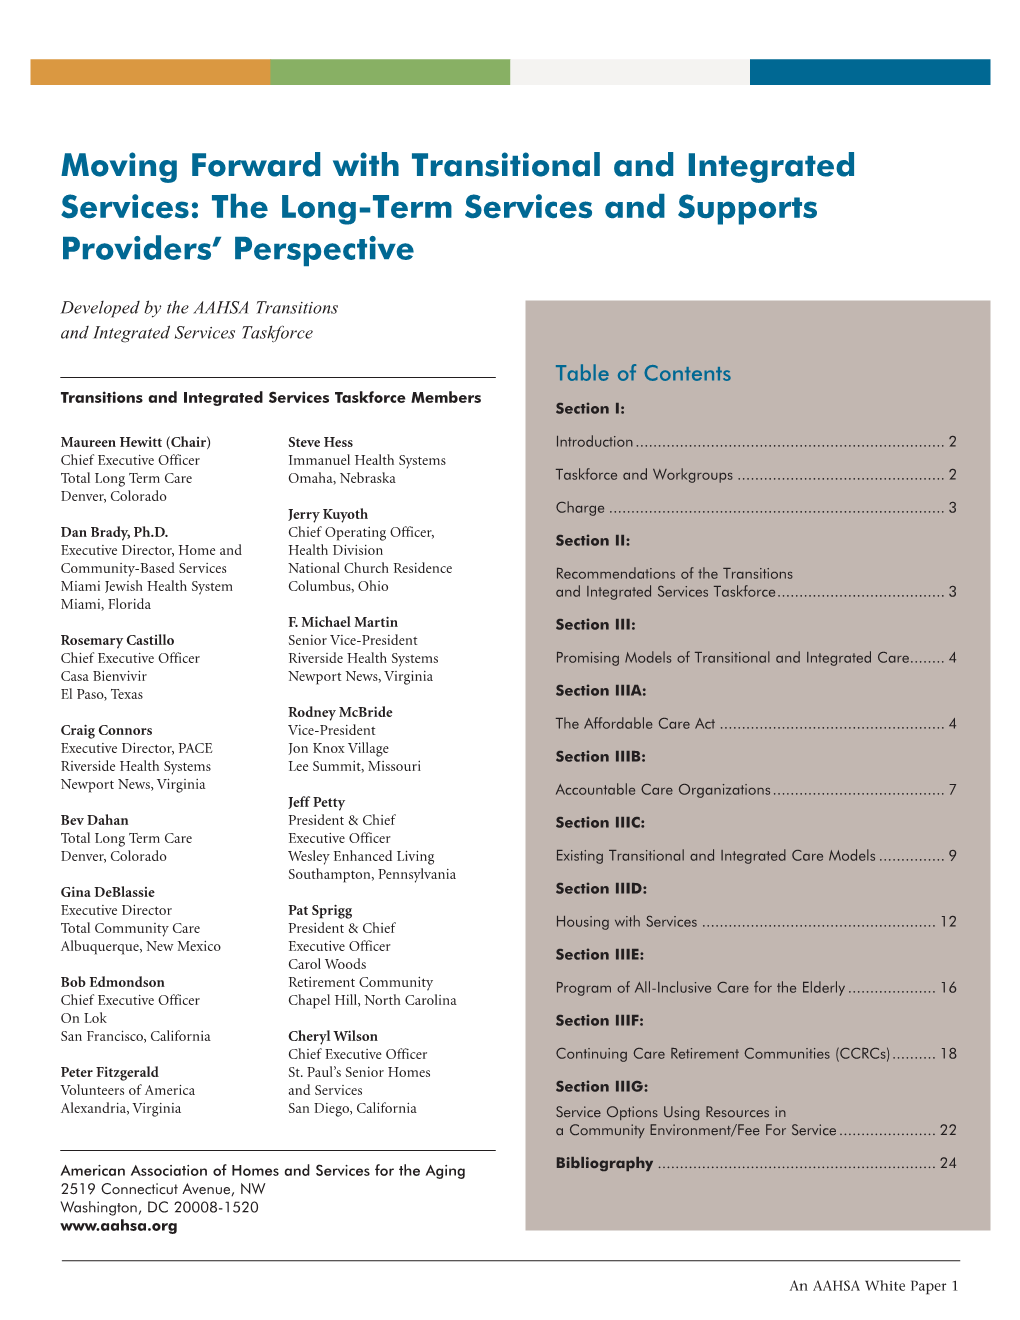 Moving Forward with Transitional and Integrated Services: the Long-Term Services and Supports Providers’ Perspective